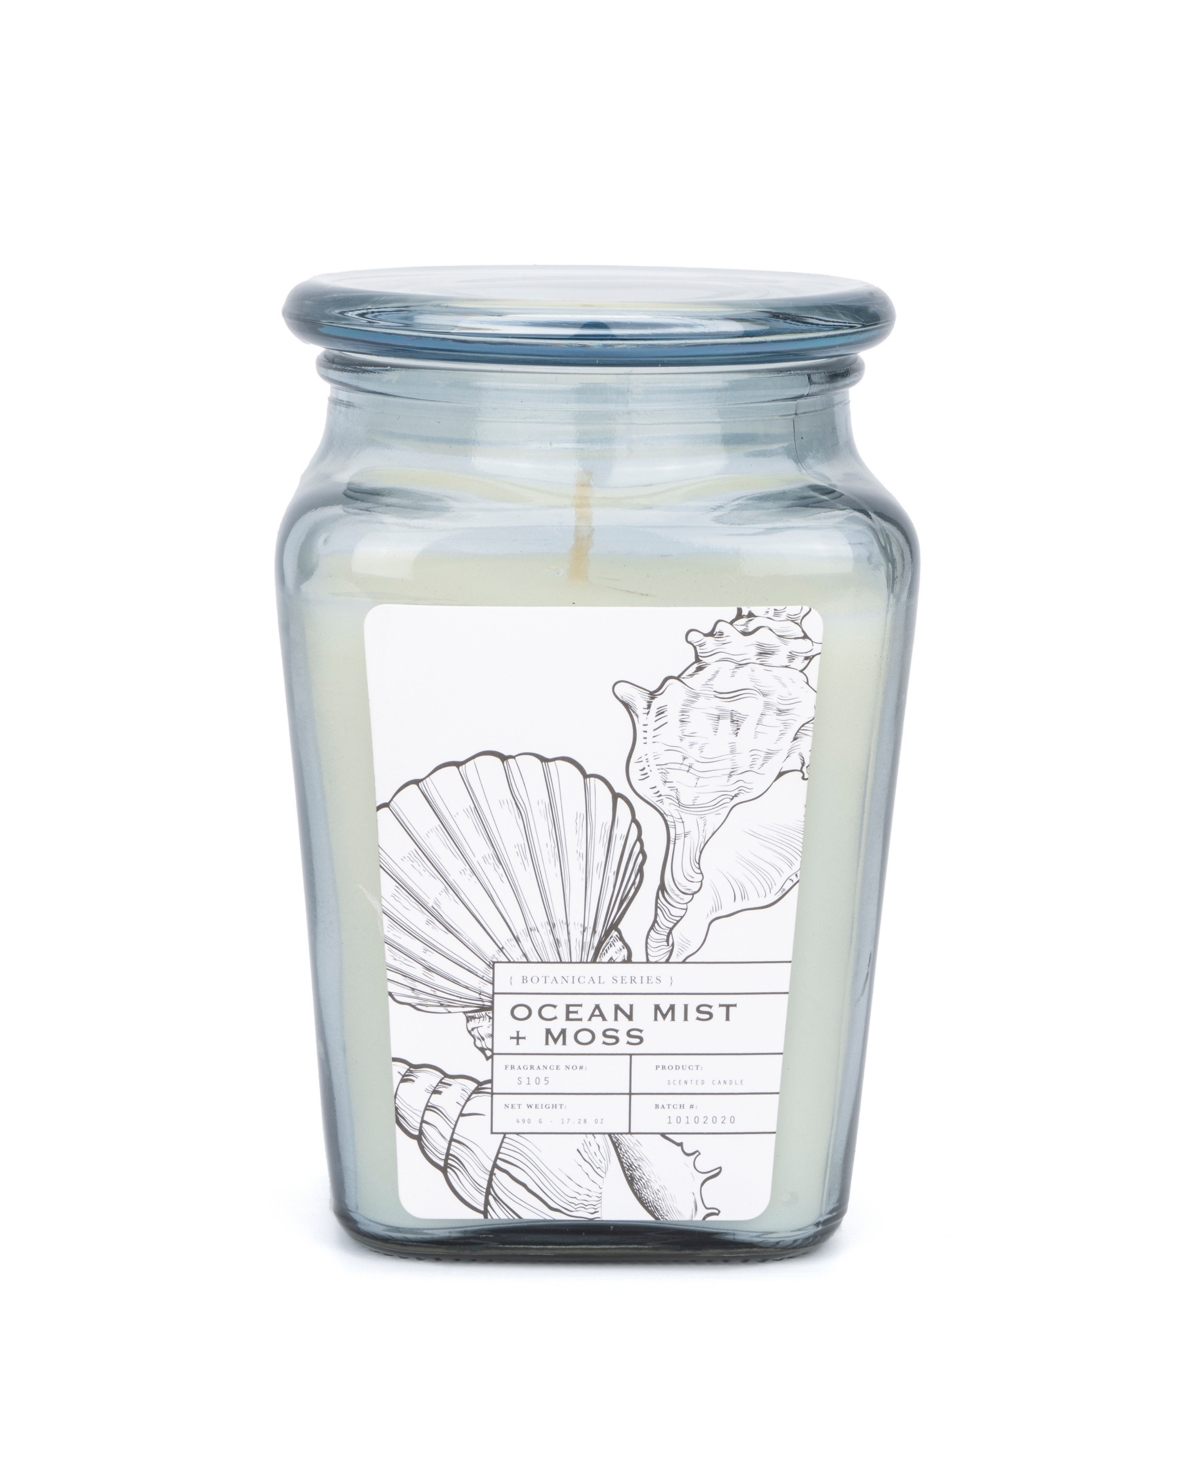 Hybrid & Company Ocean Mist Moss Scented Jar Candle In Clear